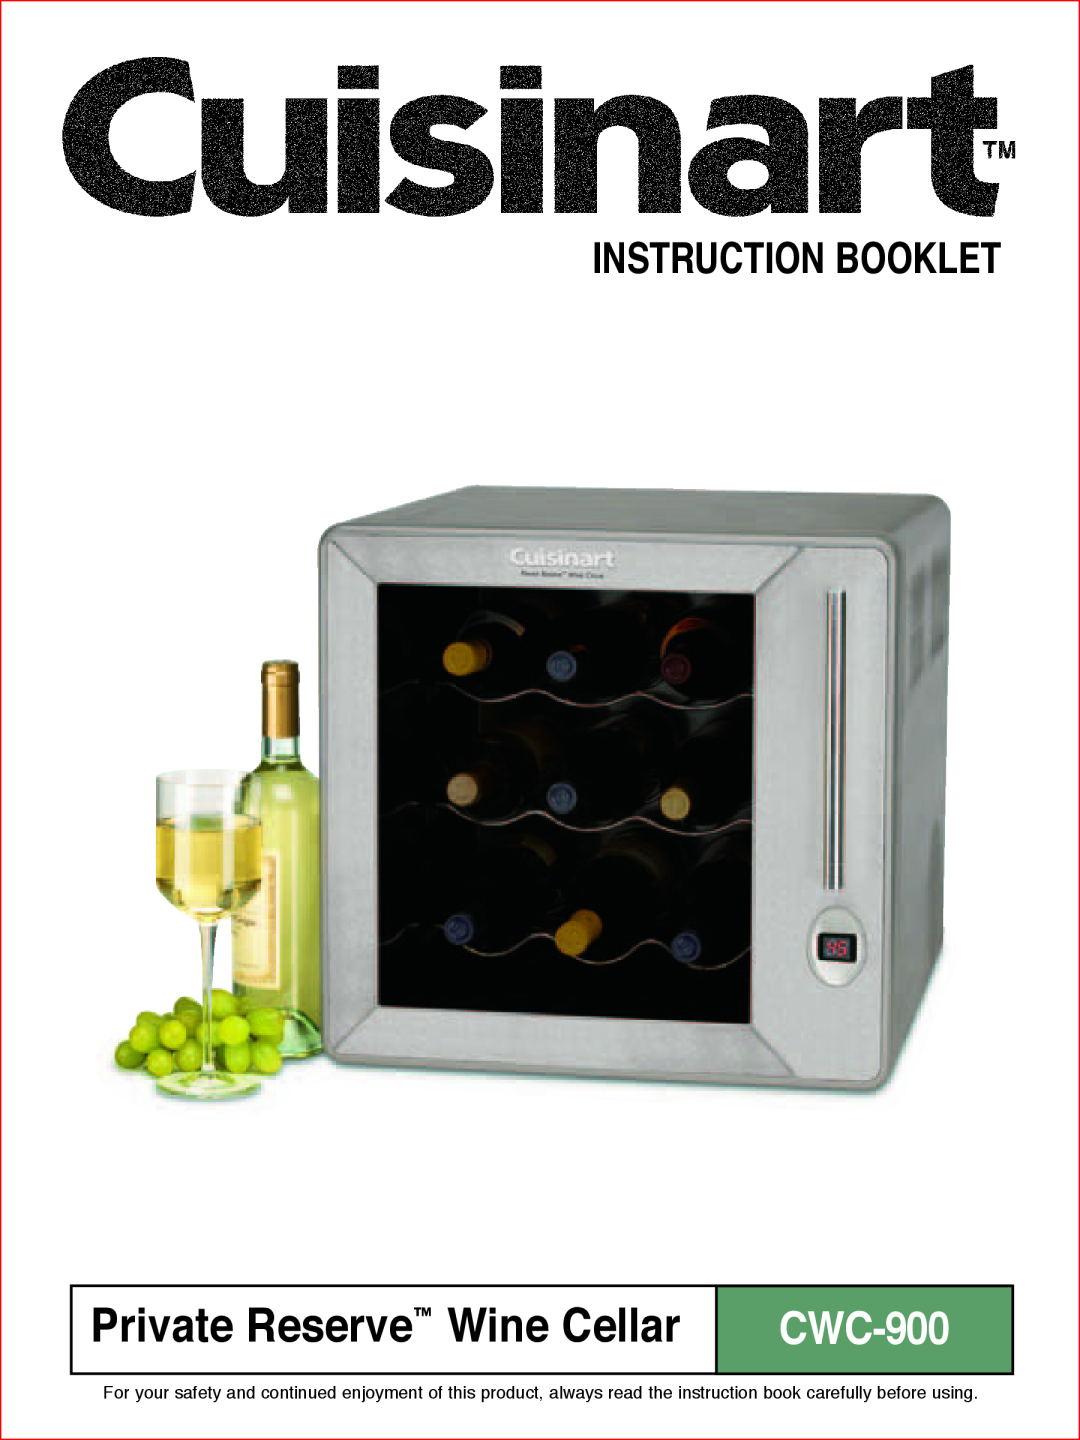 Cuisinart CWC-900C manual Private Reserve Wine Cellar, Instruction Booklet 